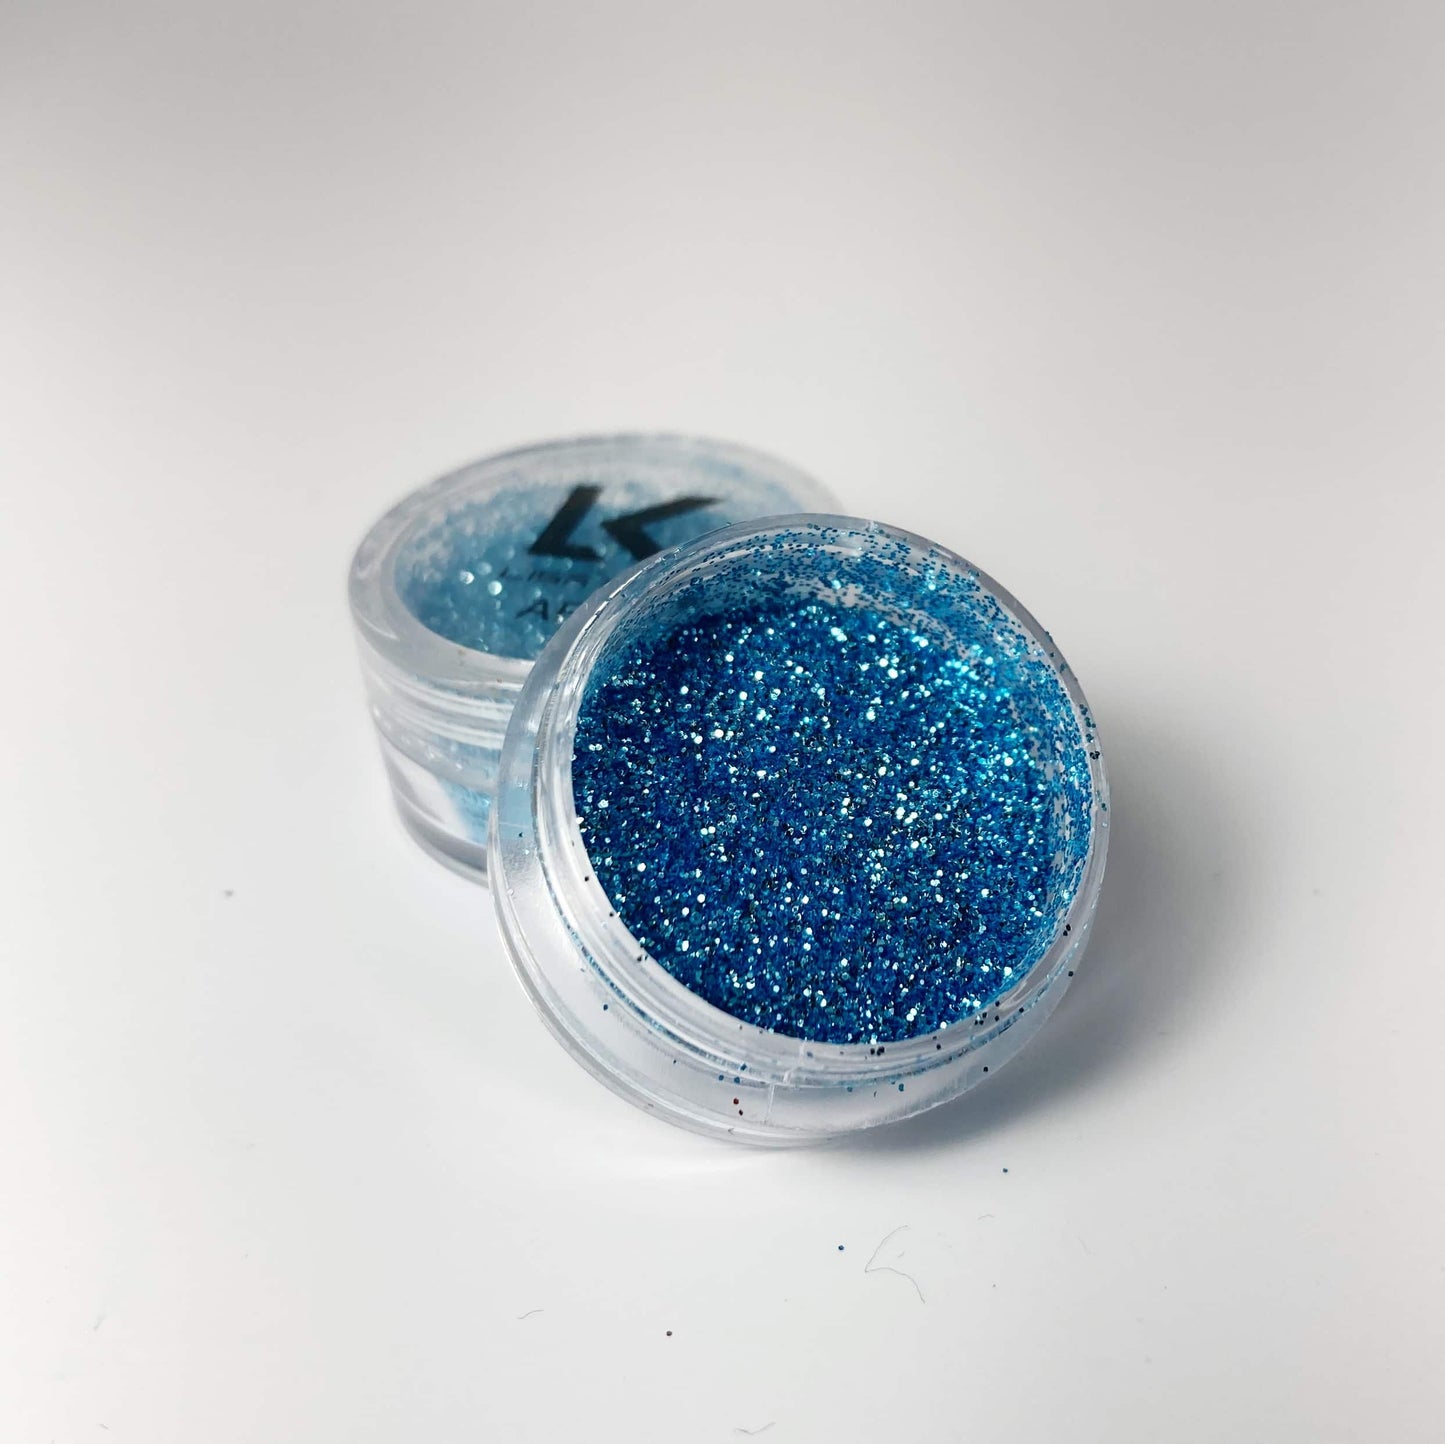 Glitter powders Collection